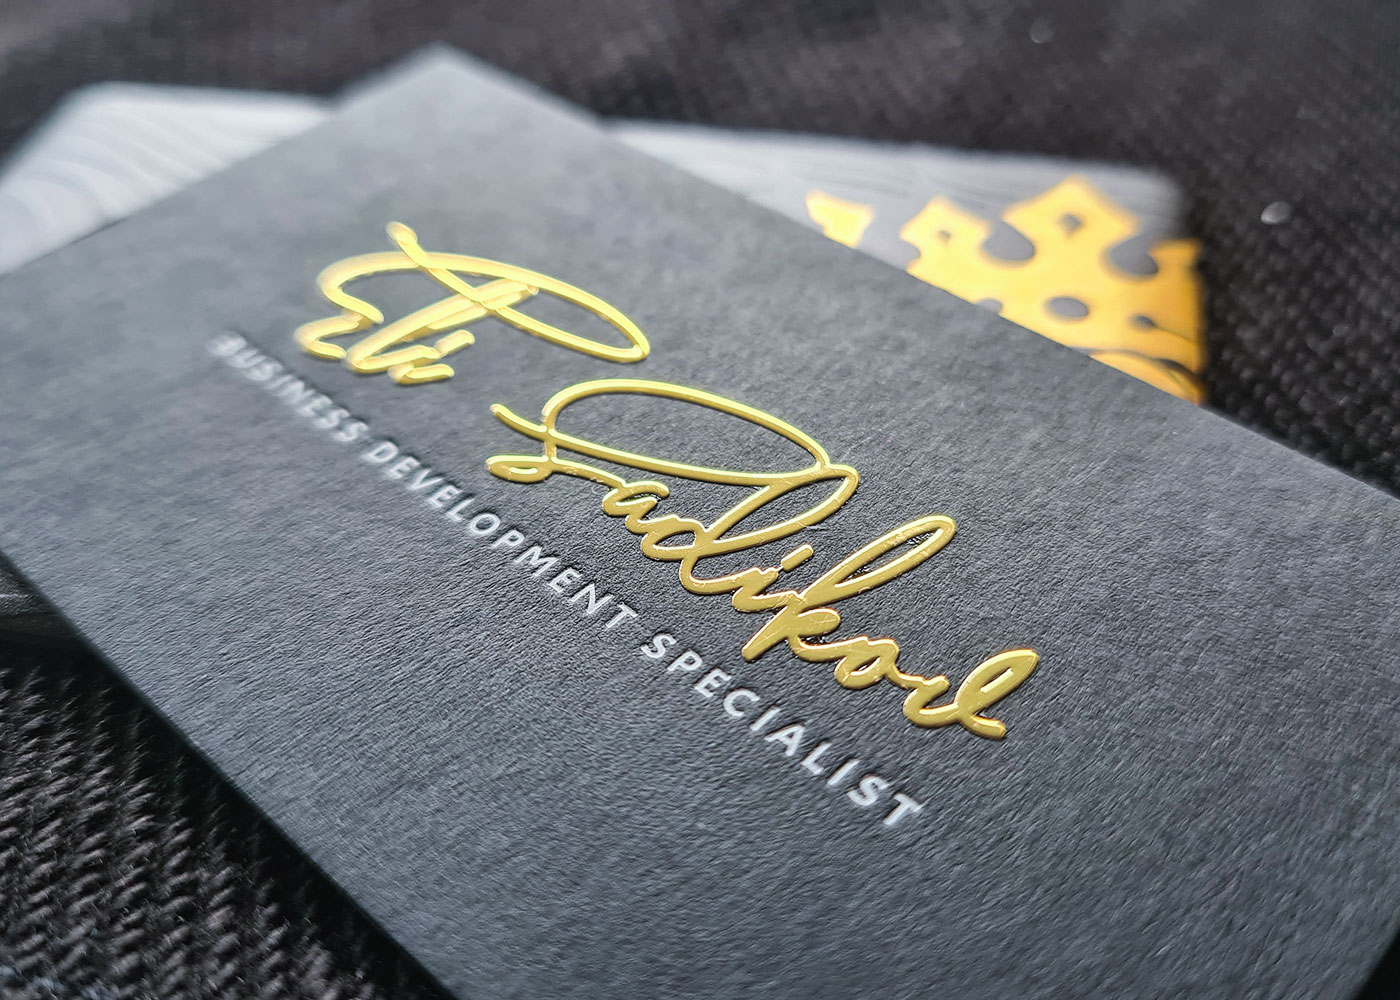 Introducing our Raised Foil & Raised UV Cards